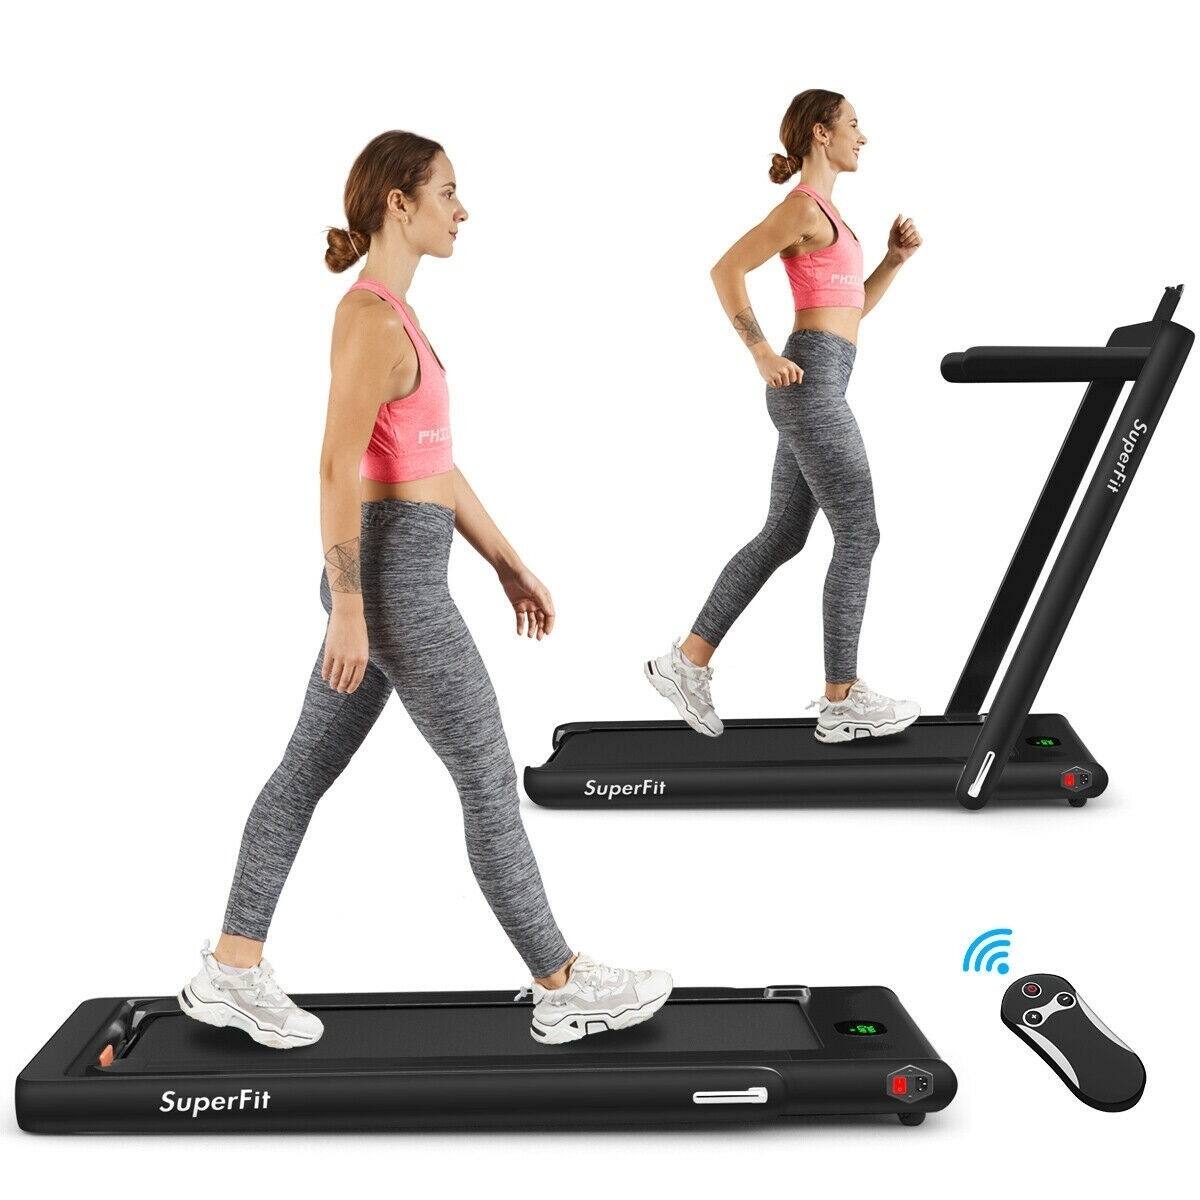 Costway 2 in 1 2.25 HP Under Desk Electric Installation-Free Folding Treadmill with LED Display $319 + Free Shipping